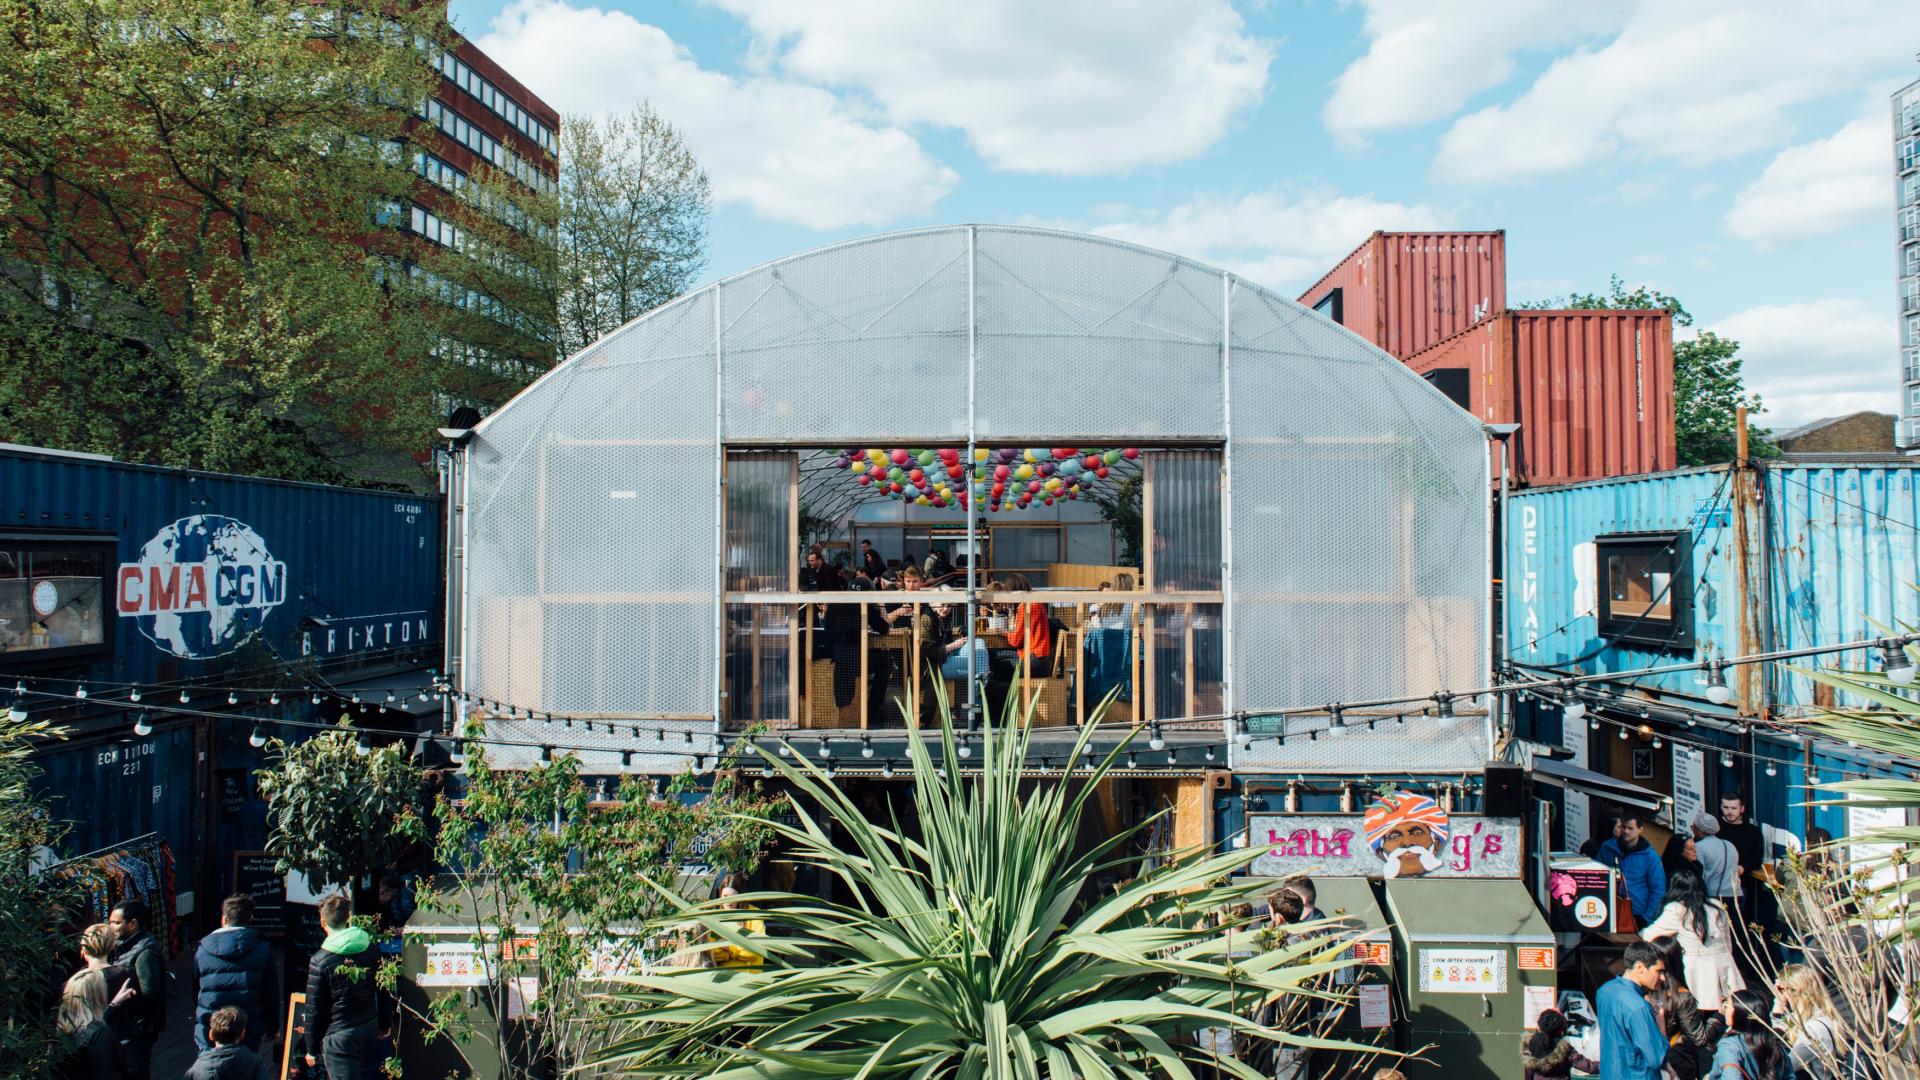 Find your Pop Up Space in London